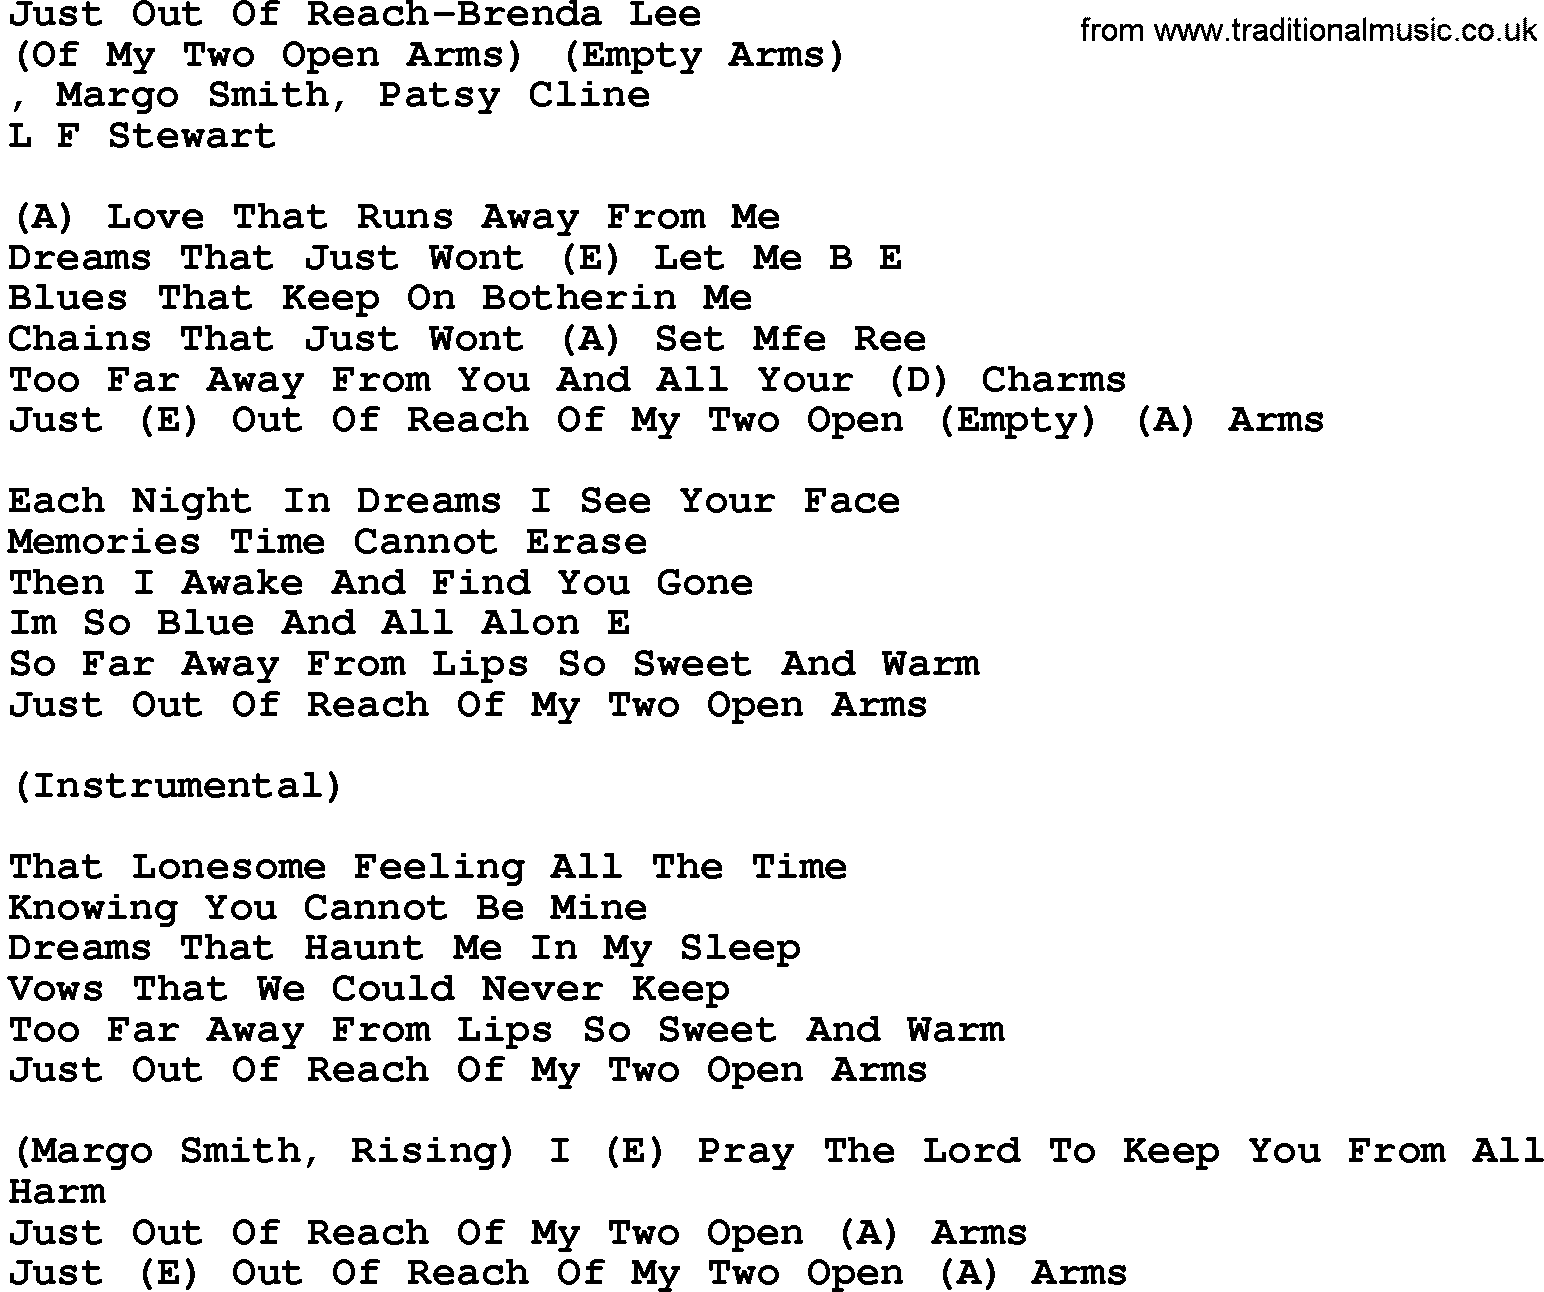 Country music song: Just Out Of Reach-Brenda Lee lyrics and chords